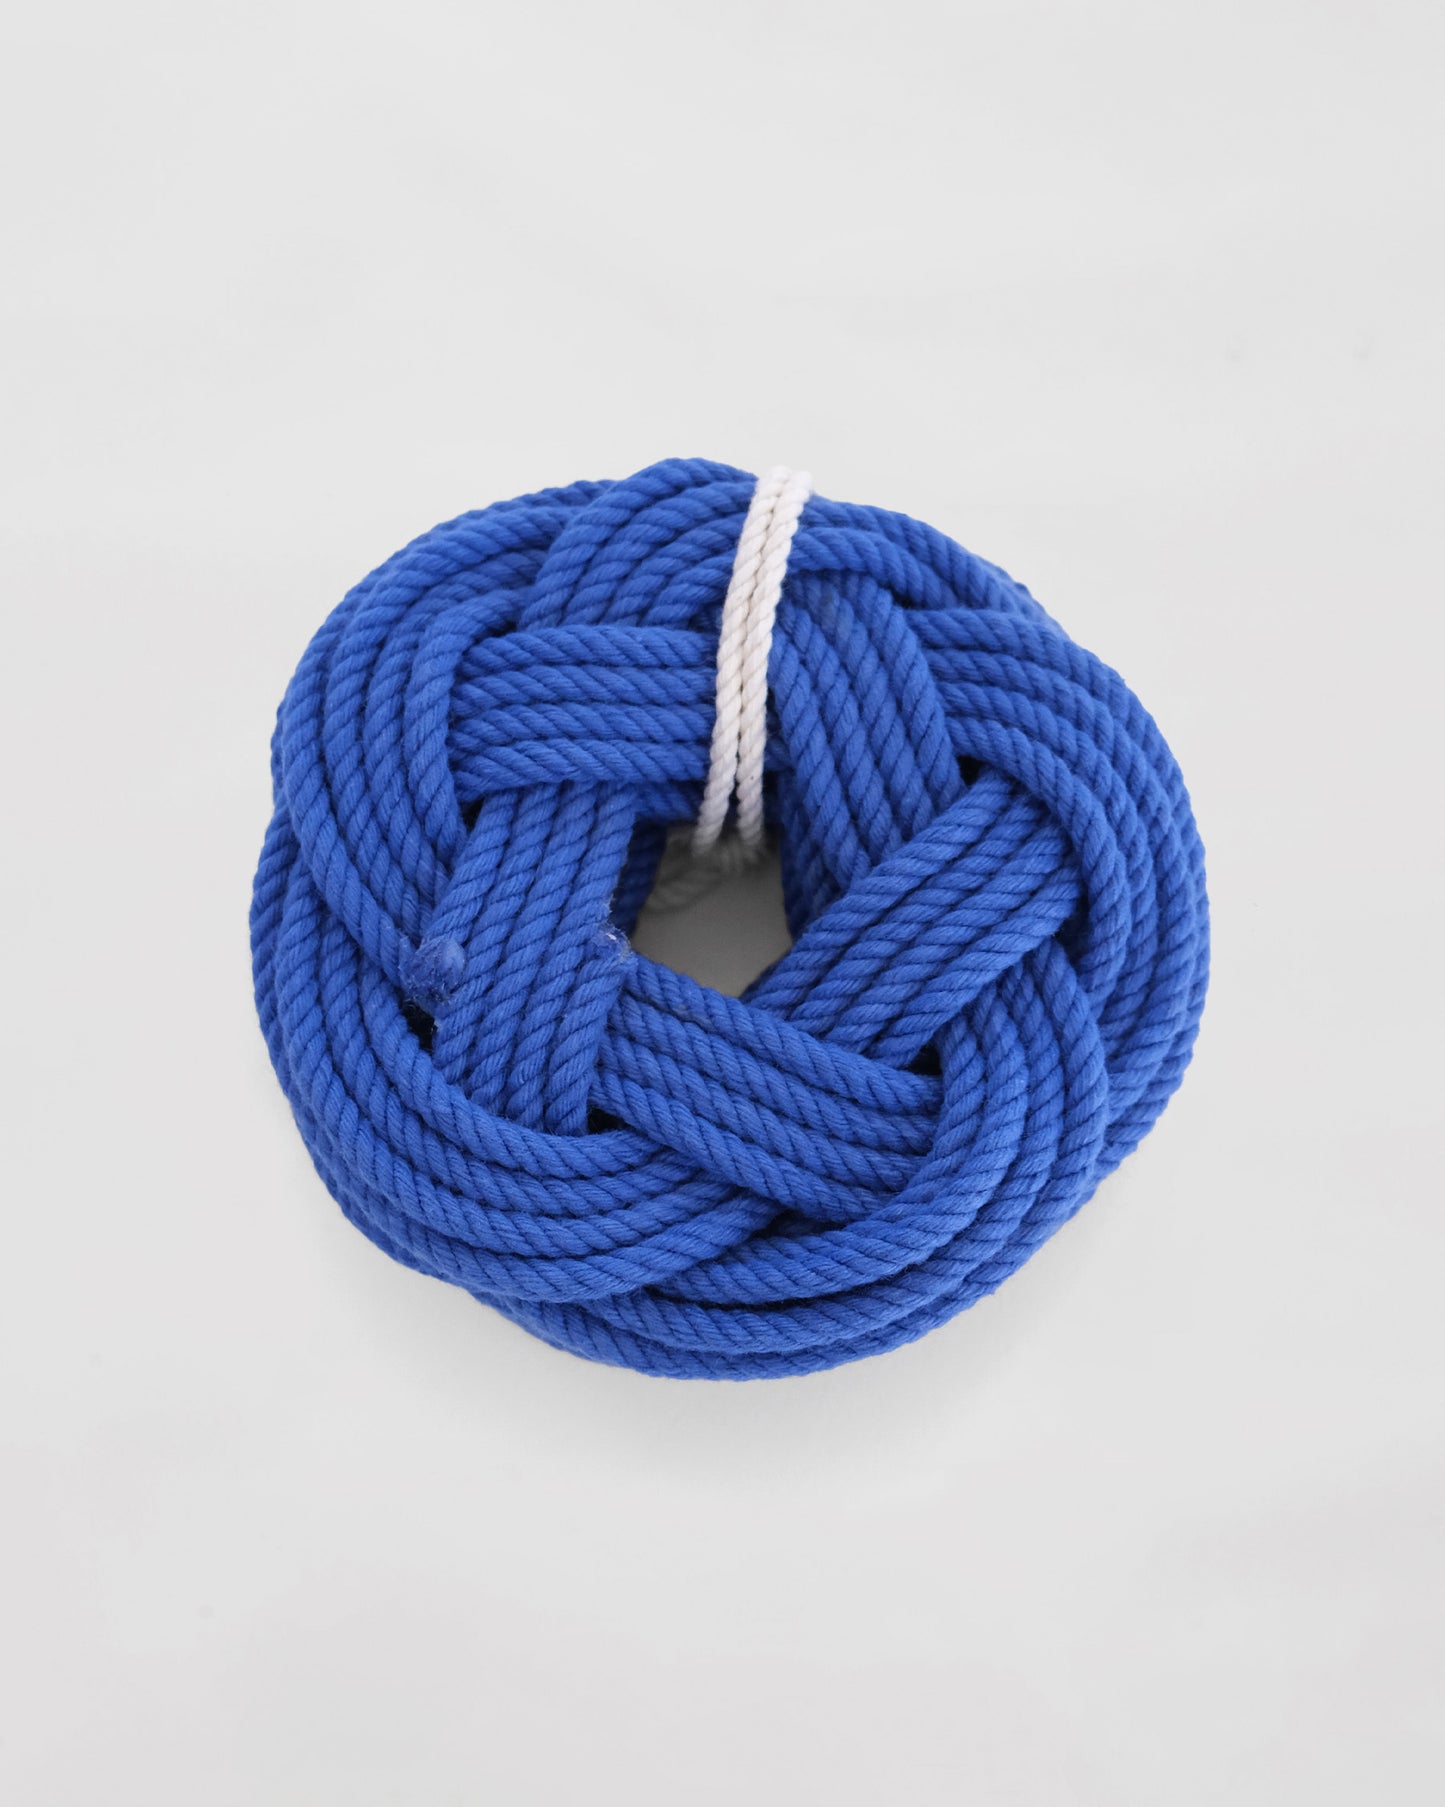 Hand-Woven Knot Coaster Set of 4